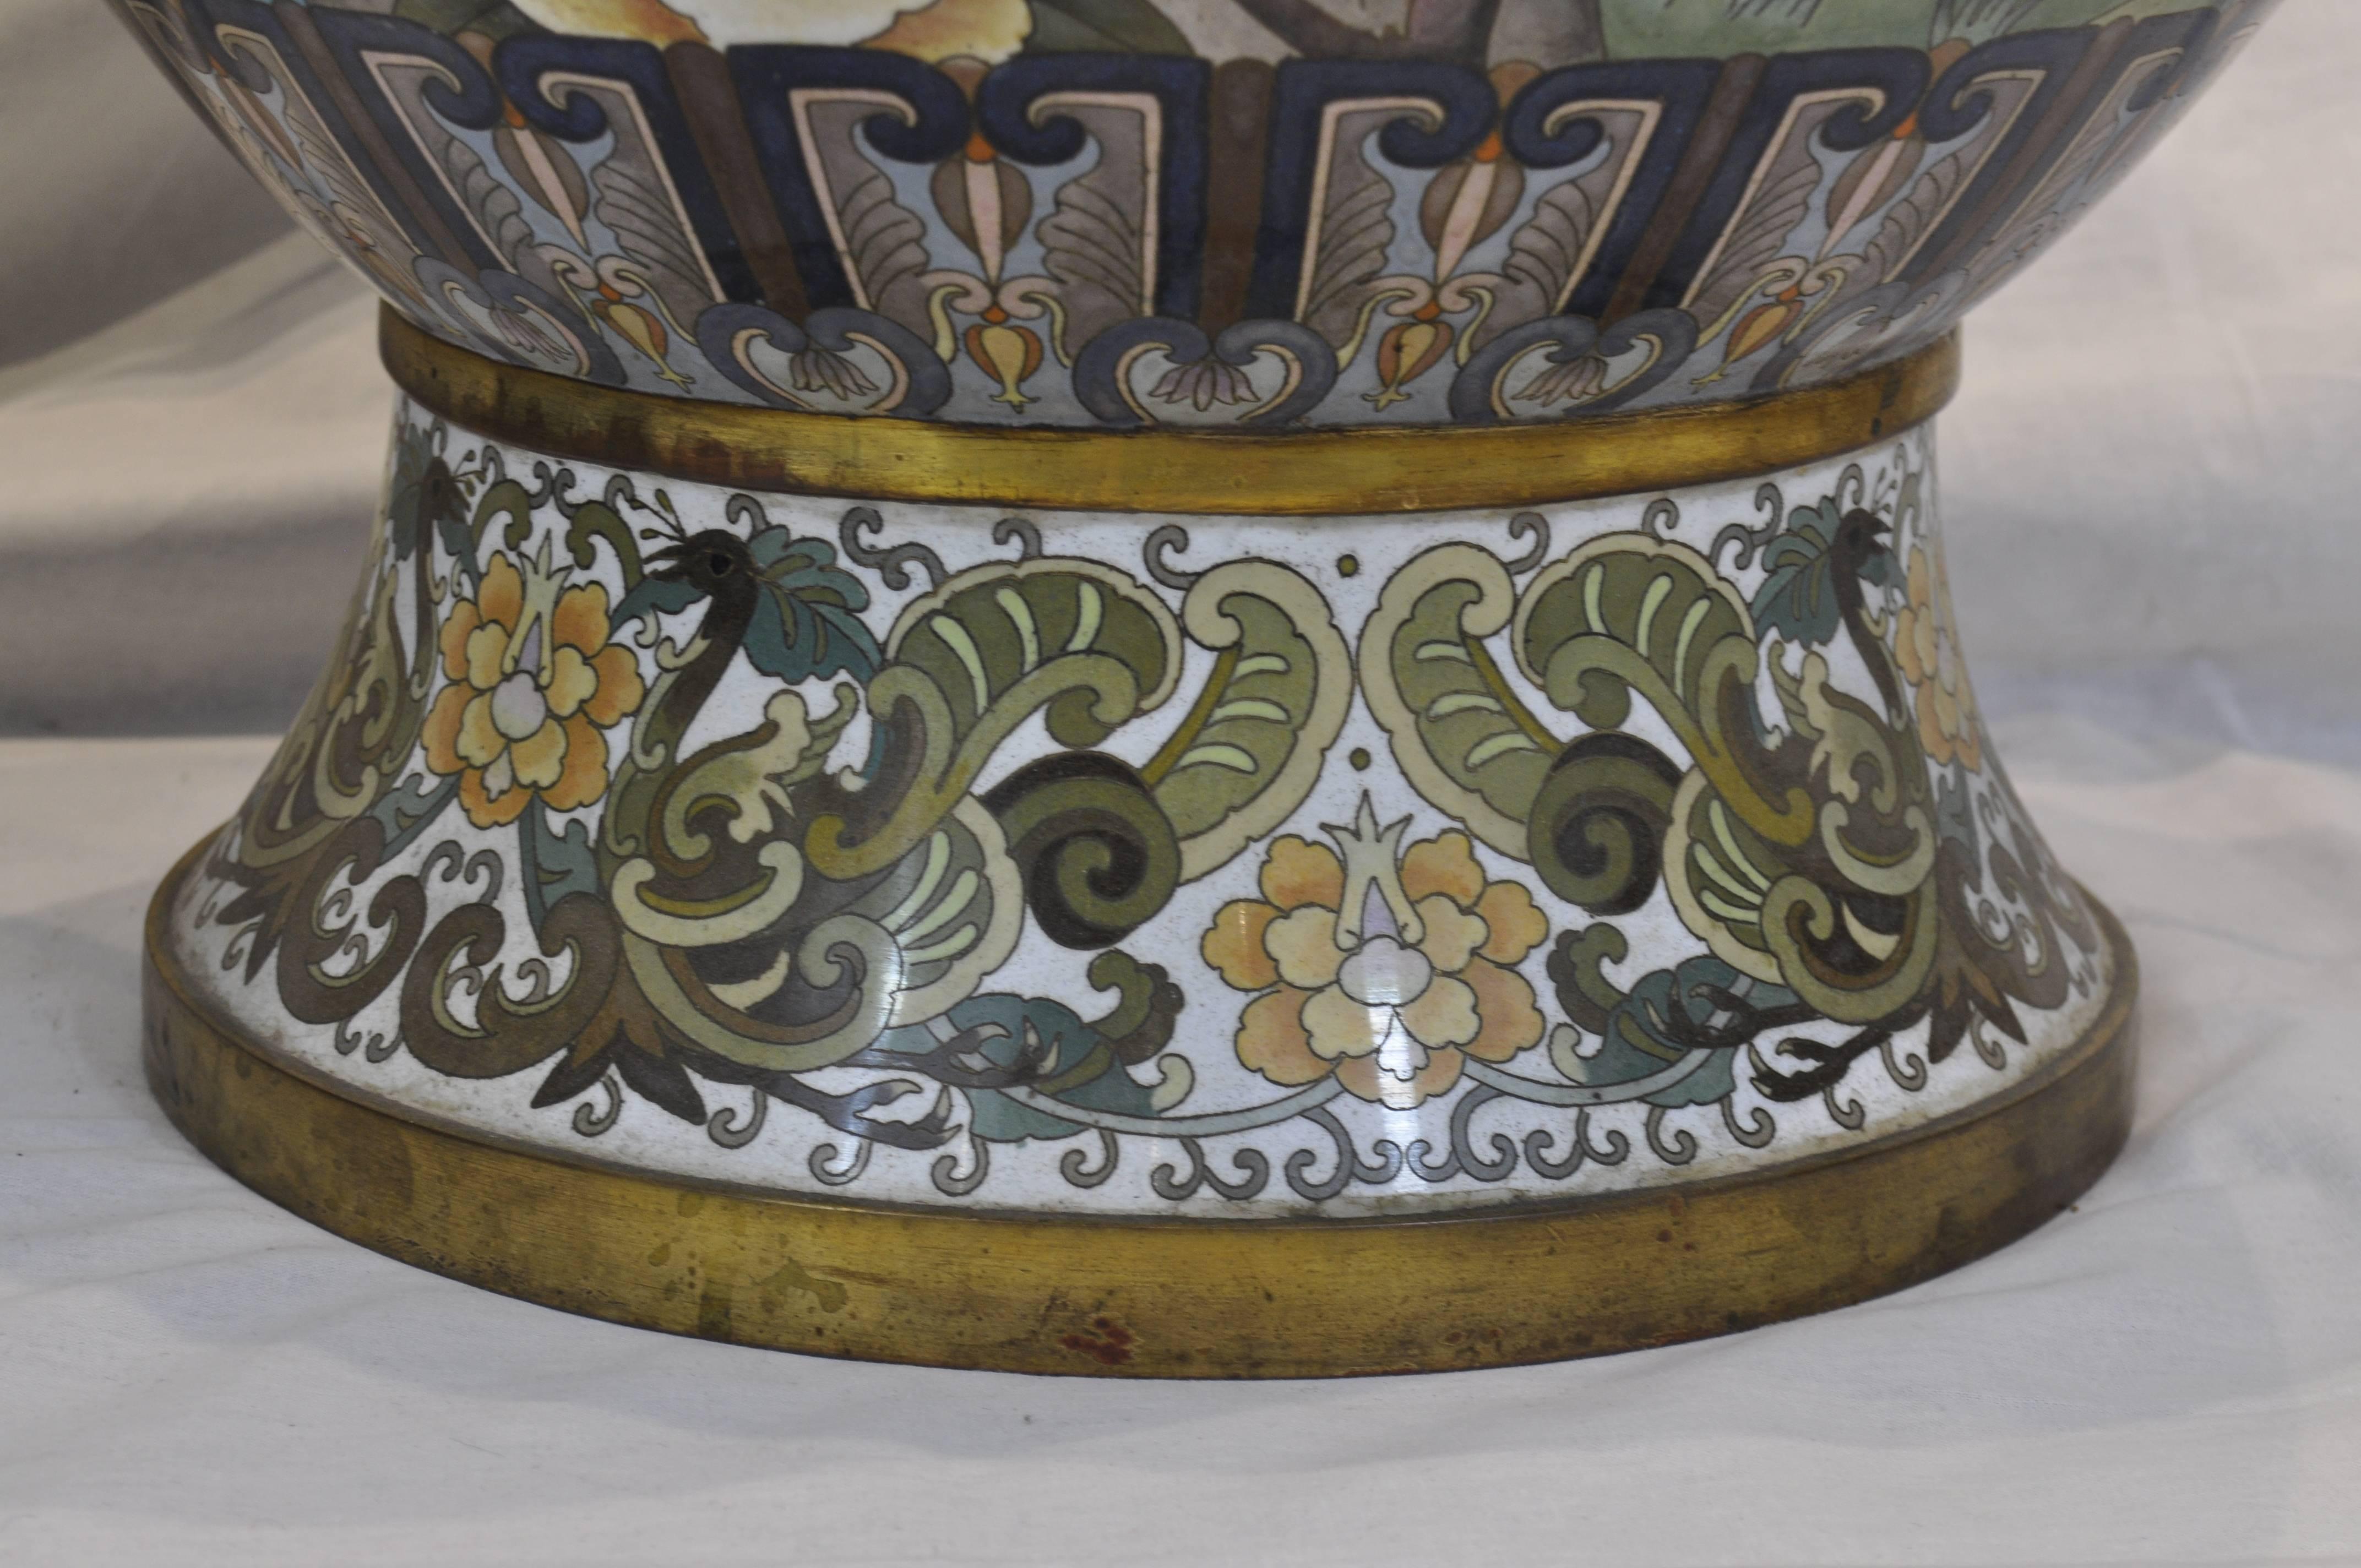 Pair of Early 20th Century Chinese Ormolu-Mounted Polychrome Cloisonné Vases For Sale 2